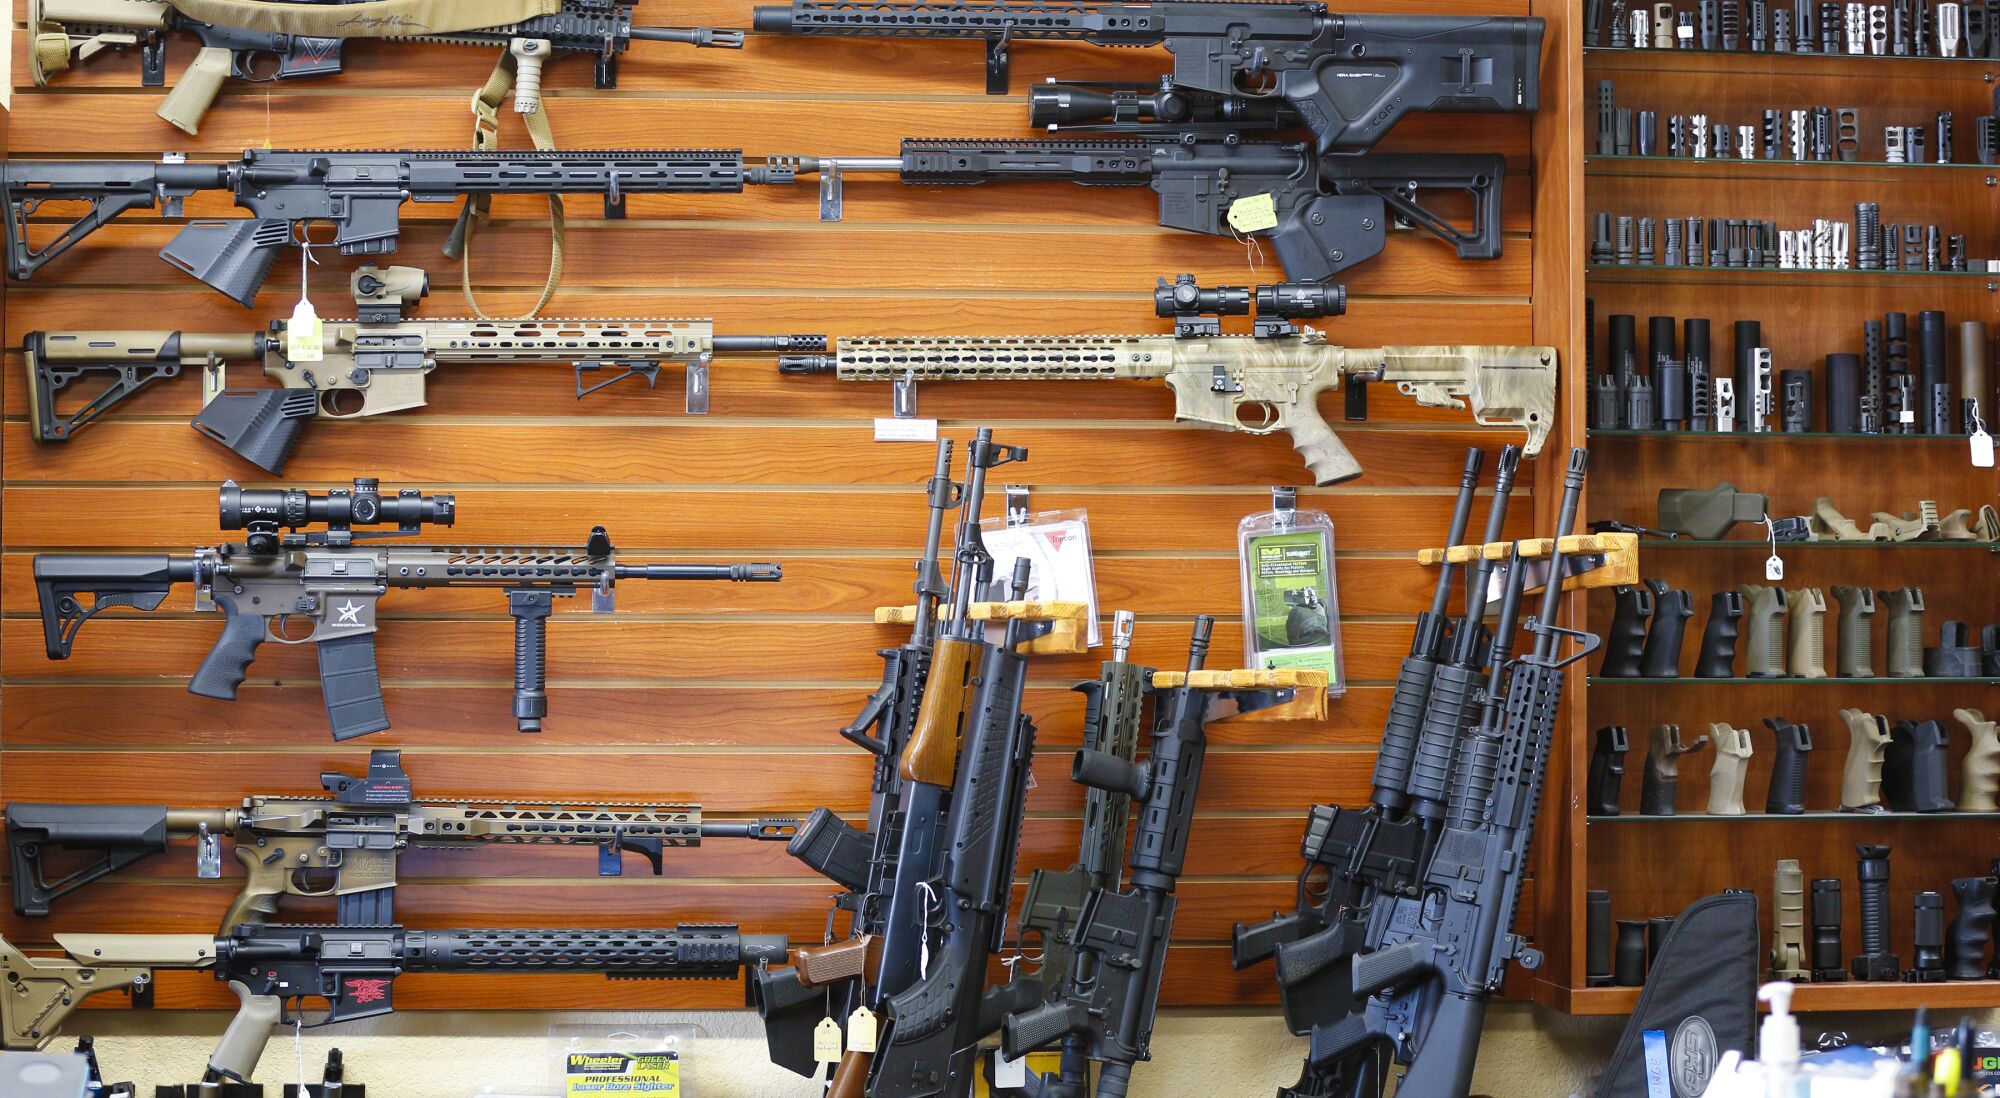 A variety of guns are on display at AO Sword Firearms in El Cajon.